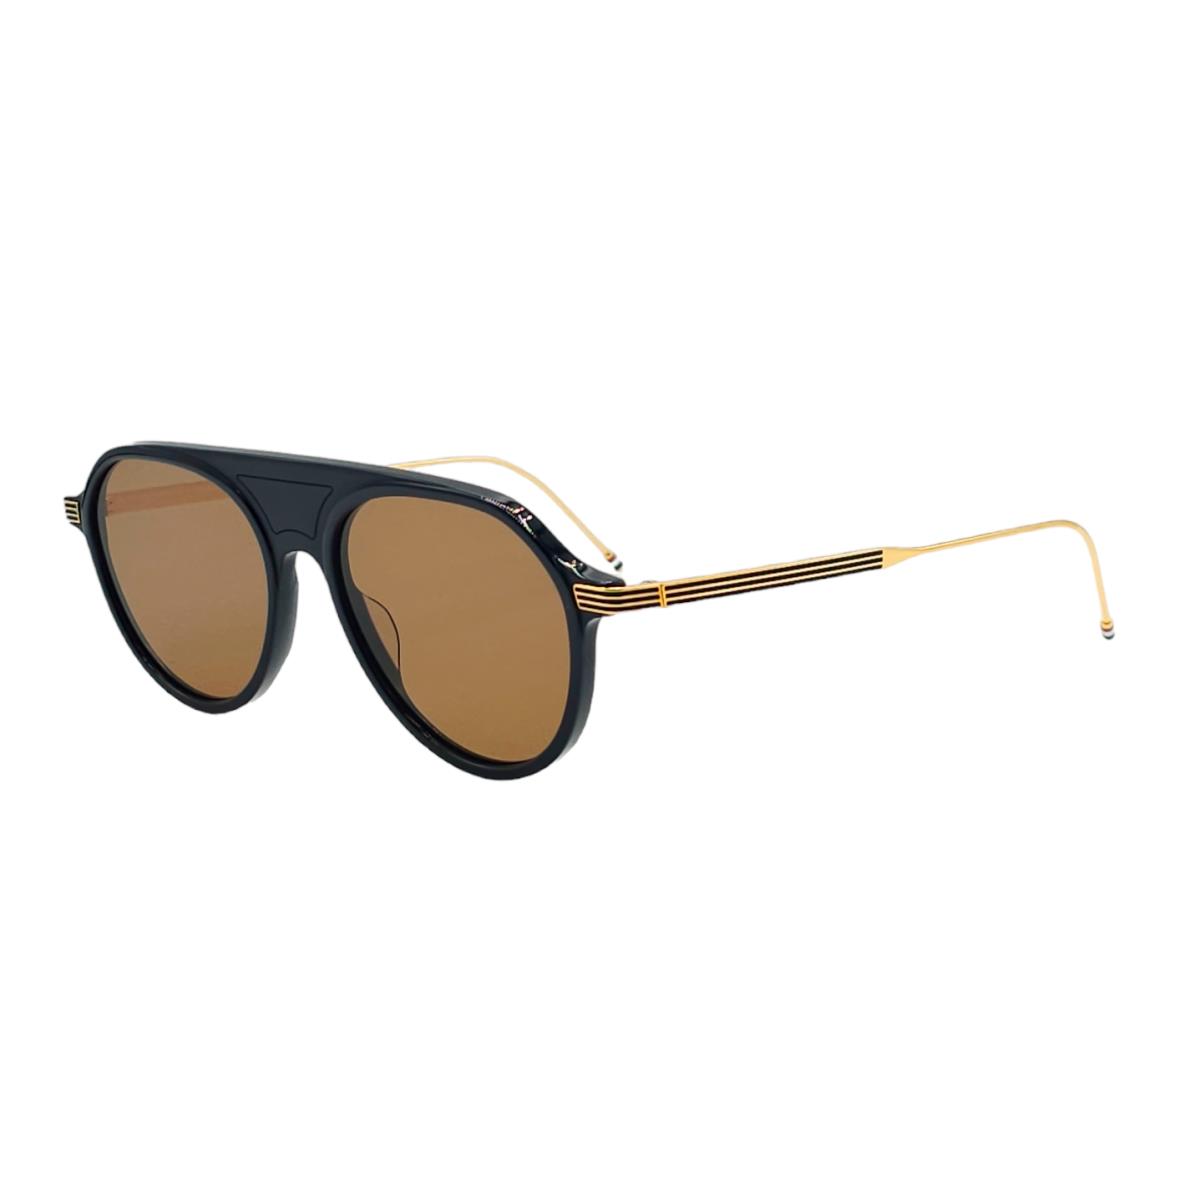 Thom Browne TB809 Sunglasses Color C Navy-gold / Brown Lenses - Navy-Gold Frame